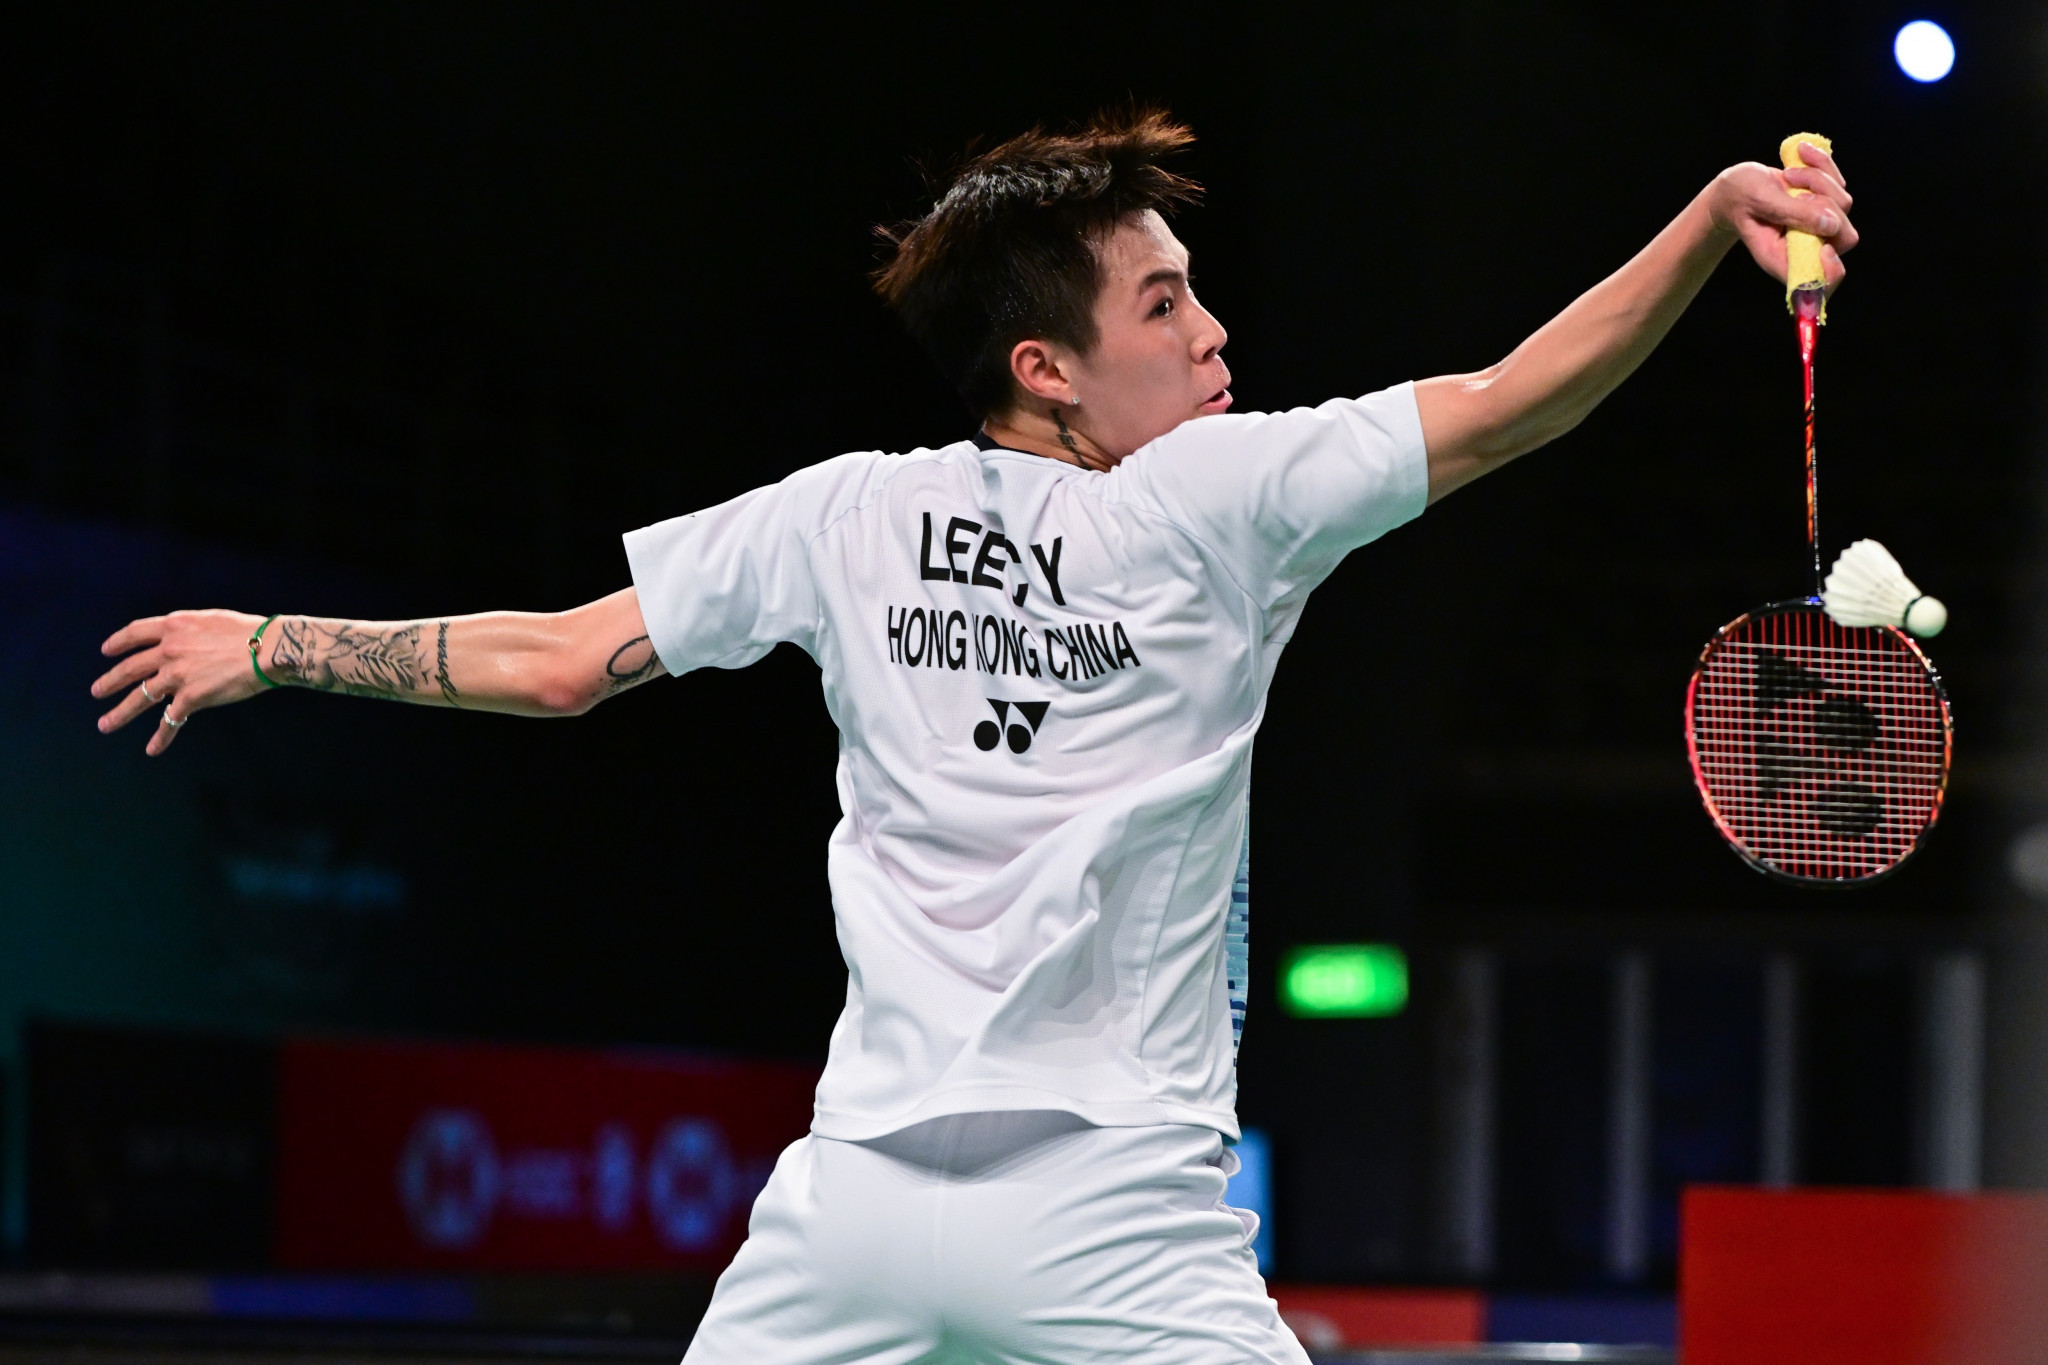 Lee Cheuk Yiu of Hong Kong shows off his skills against Germany's Max Weisskirchen ©Badmintonphoto